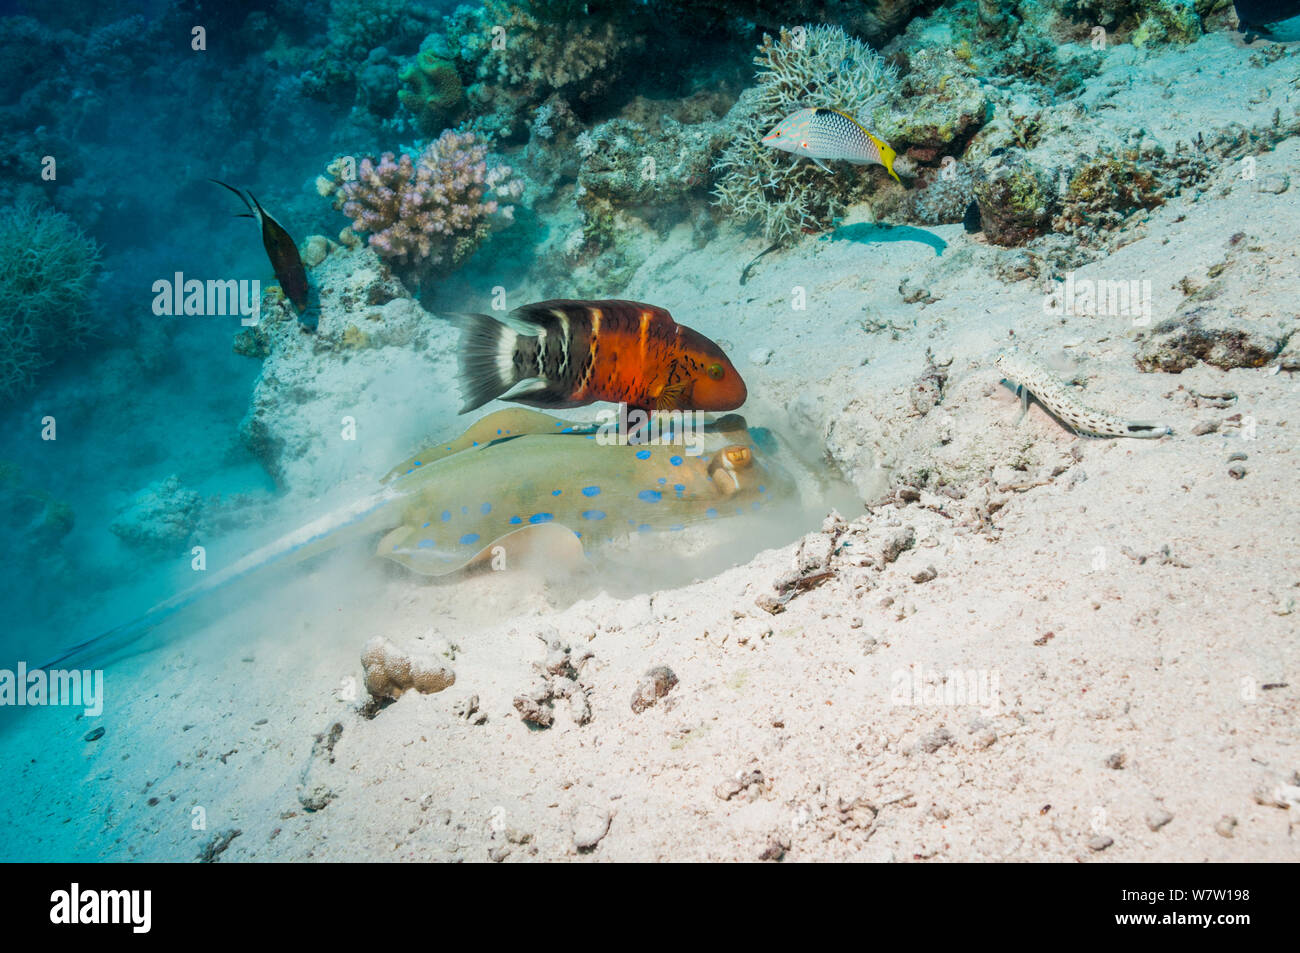 Bluespotted ribbontail ray (Taeniura lymna) digging in the sandy bottom for molluscs or worms, with a Red banded wrasse (Cheilinus fasciatus) hoping to catch escaping prey.  Egypt, Red Sea. Stock Photo